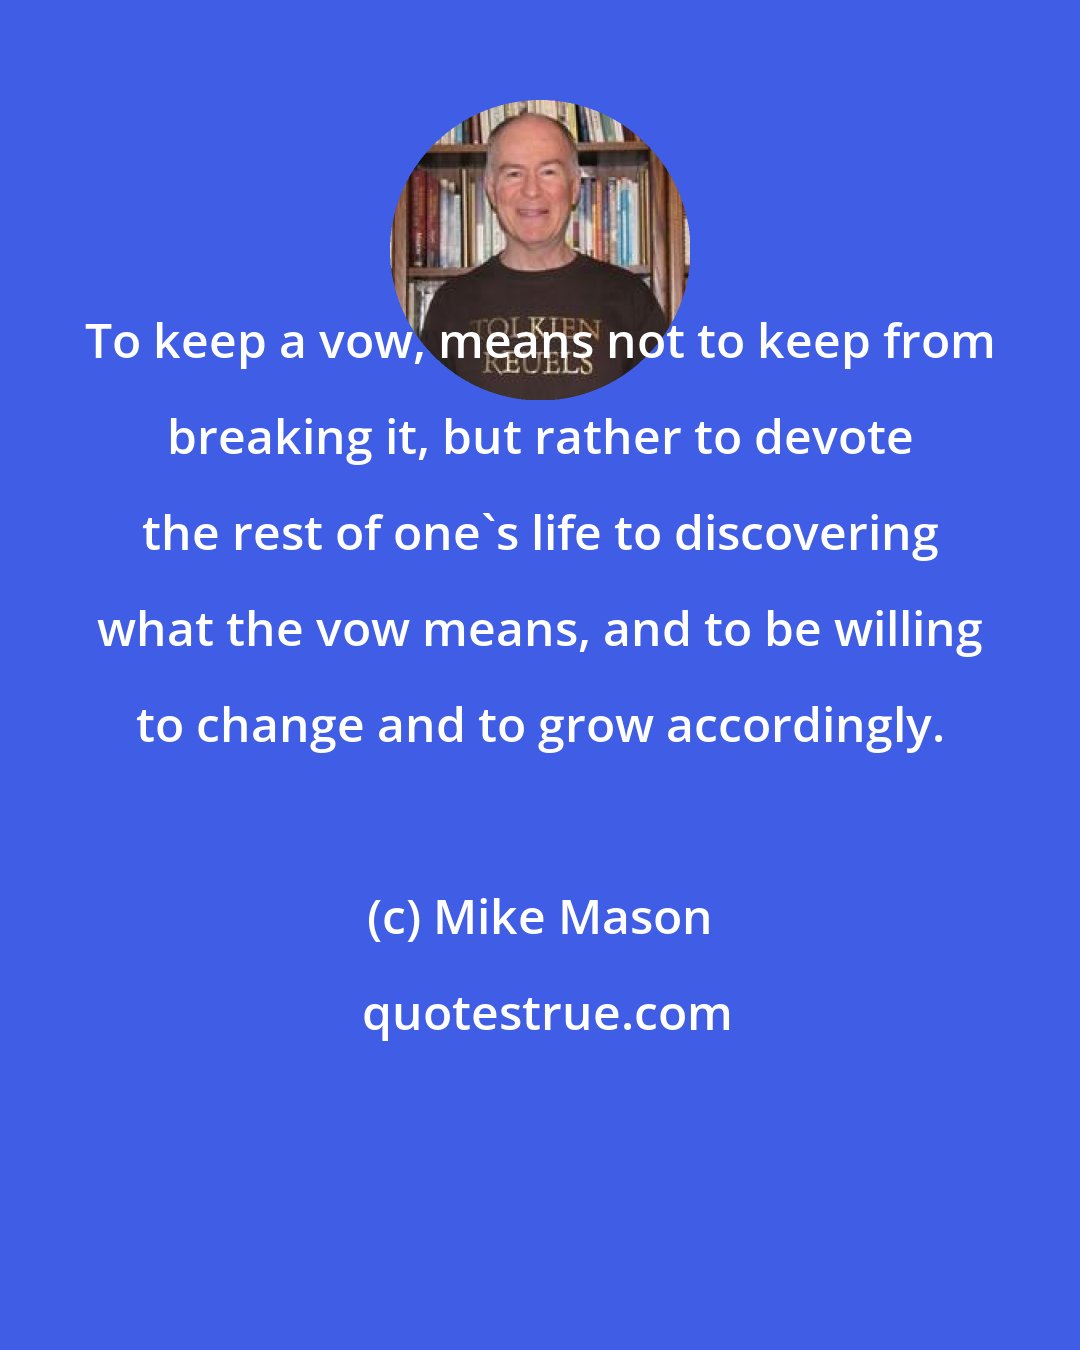 Mike Mason: To keep a vow, means not to keep from breaking it, but rather to devote the rest of one's life to discovering what the vow means, and to be willing to change and to grow accordingly.